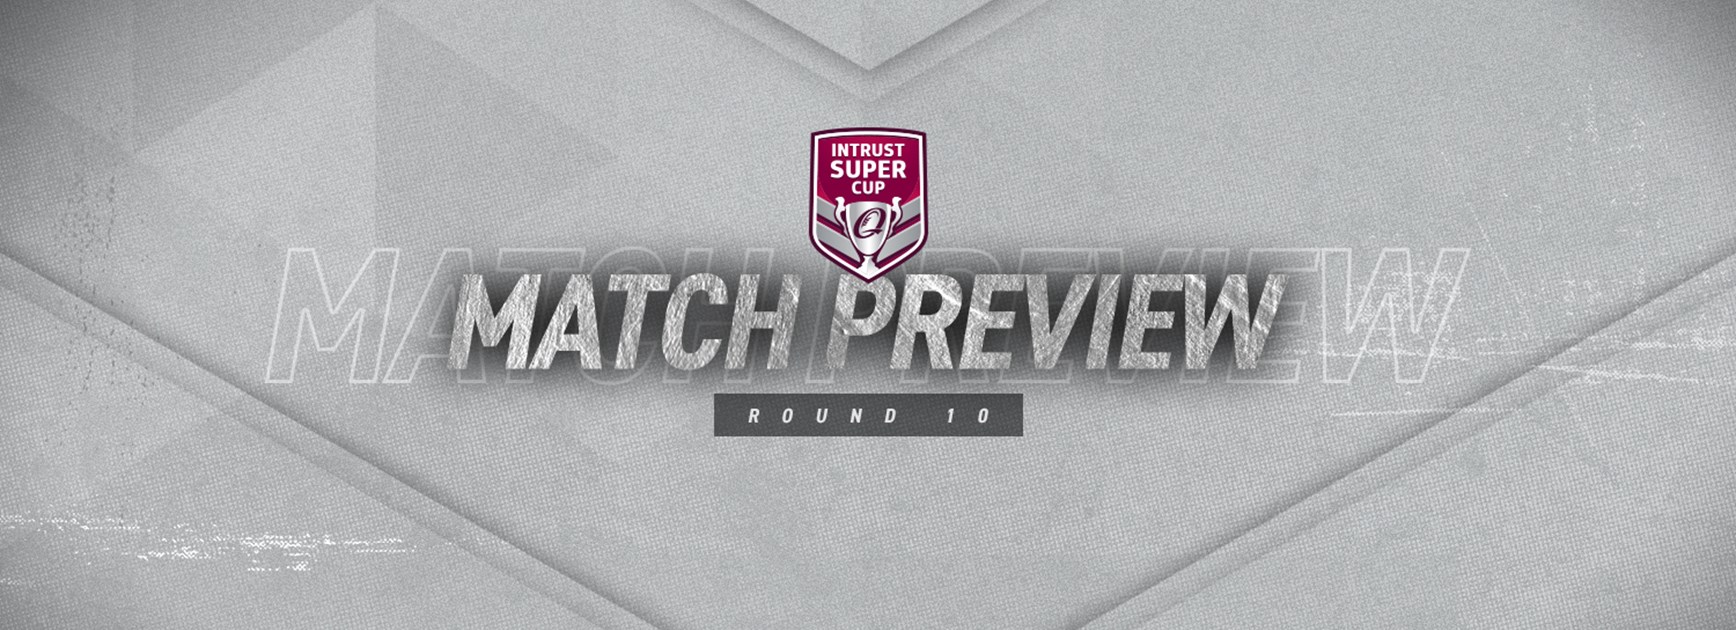 Intrust Super Cup Round 10 preview